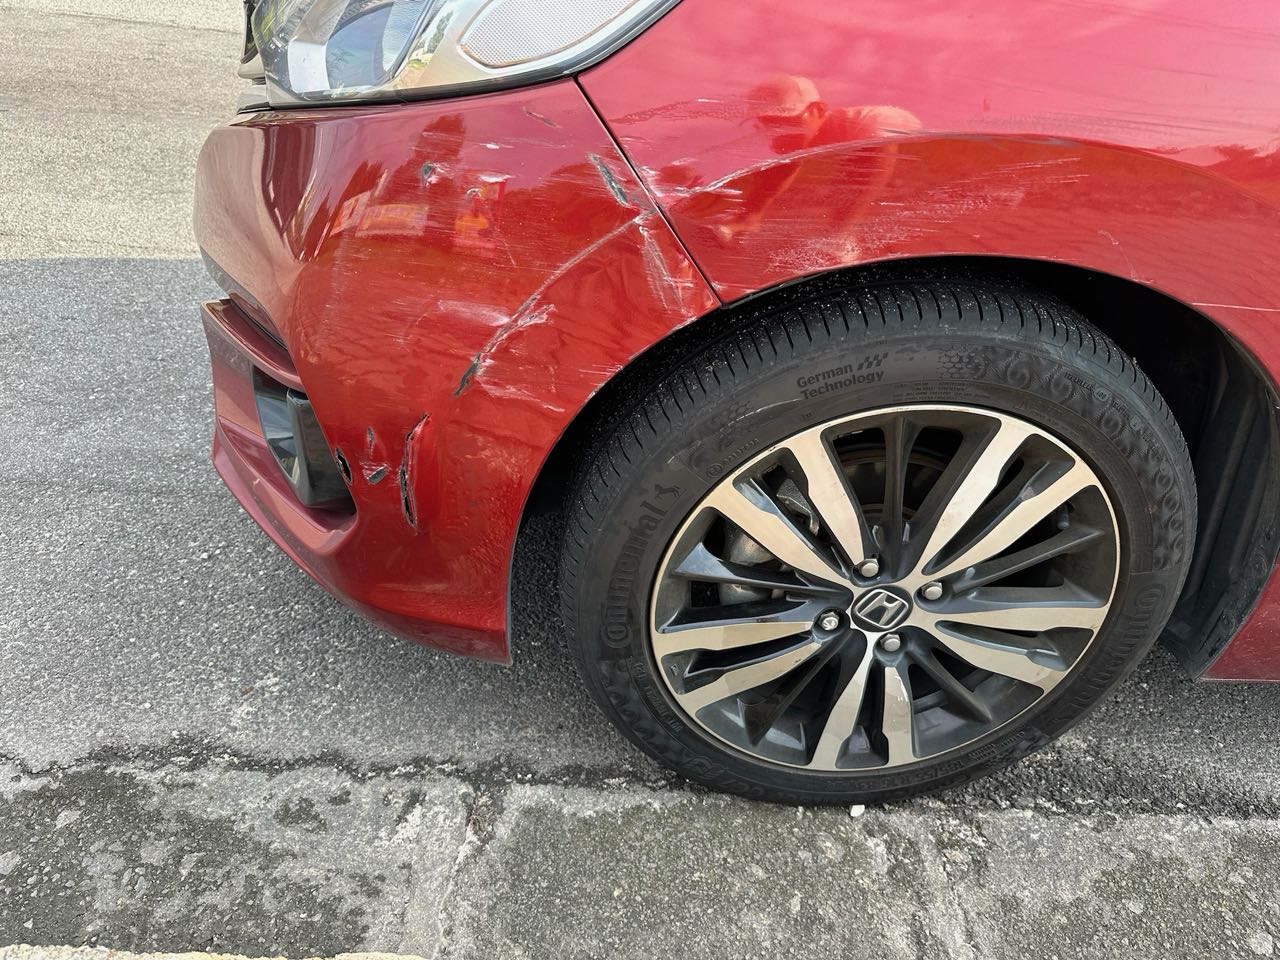 Scratches on a car following an accident